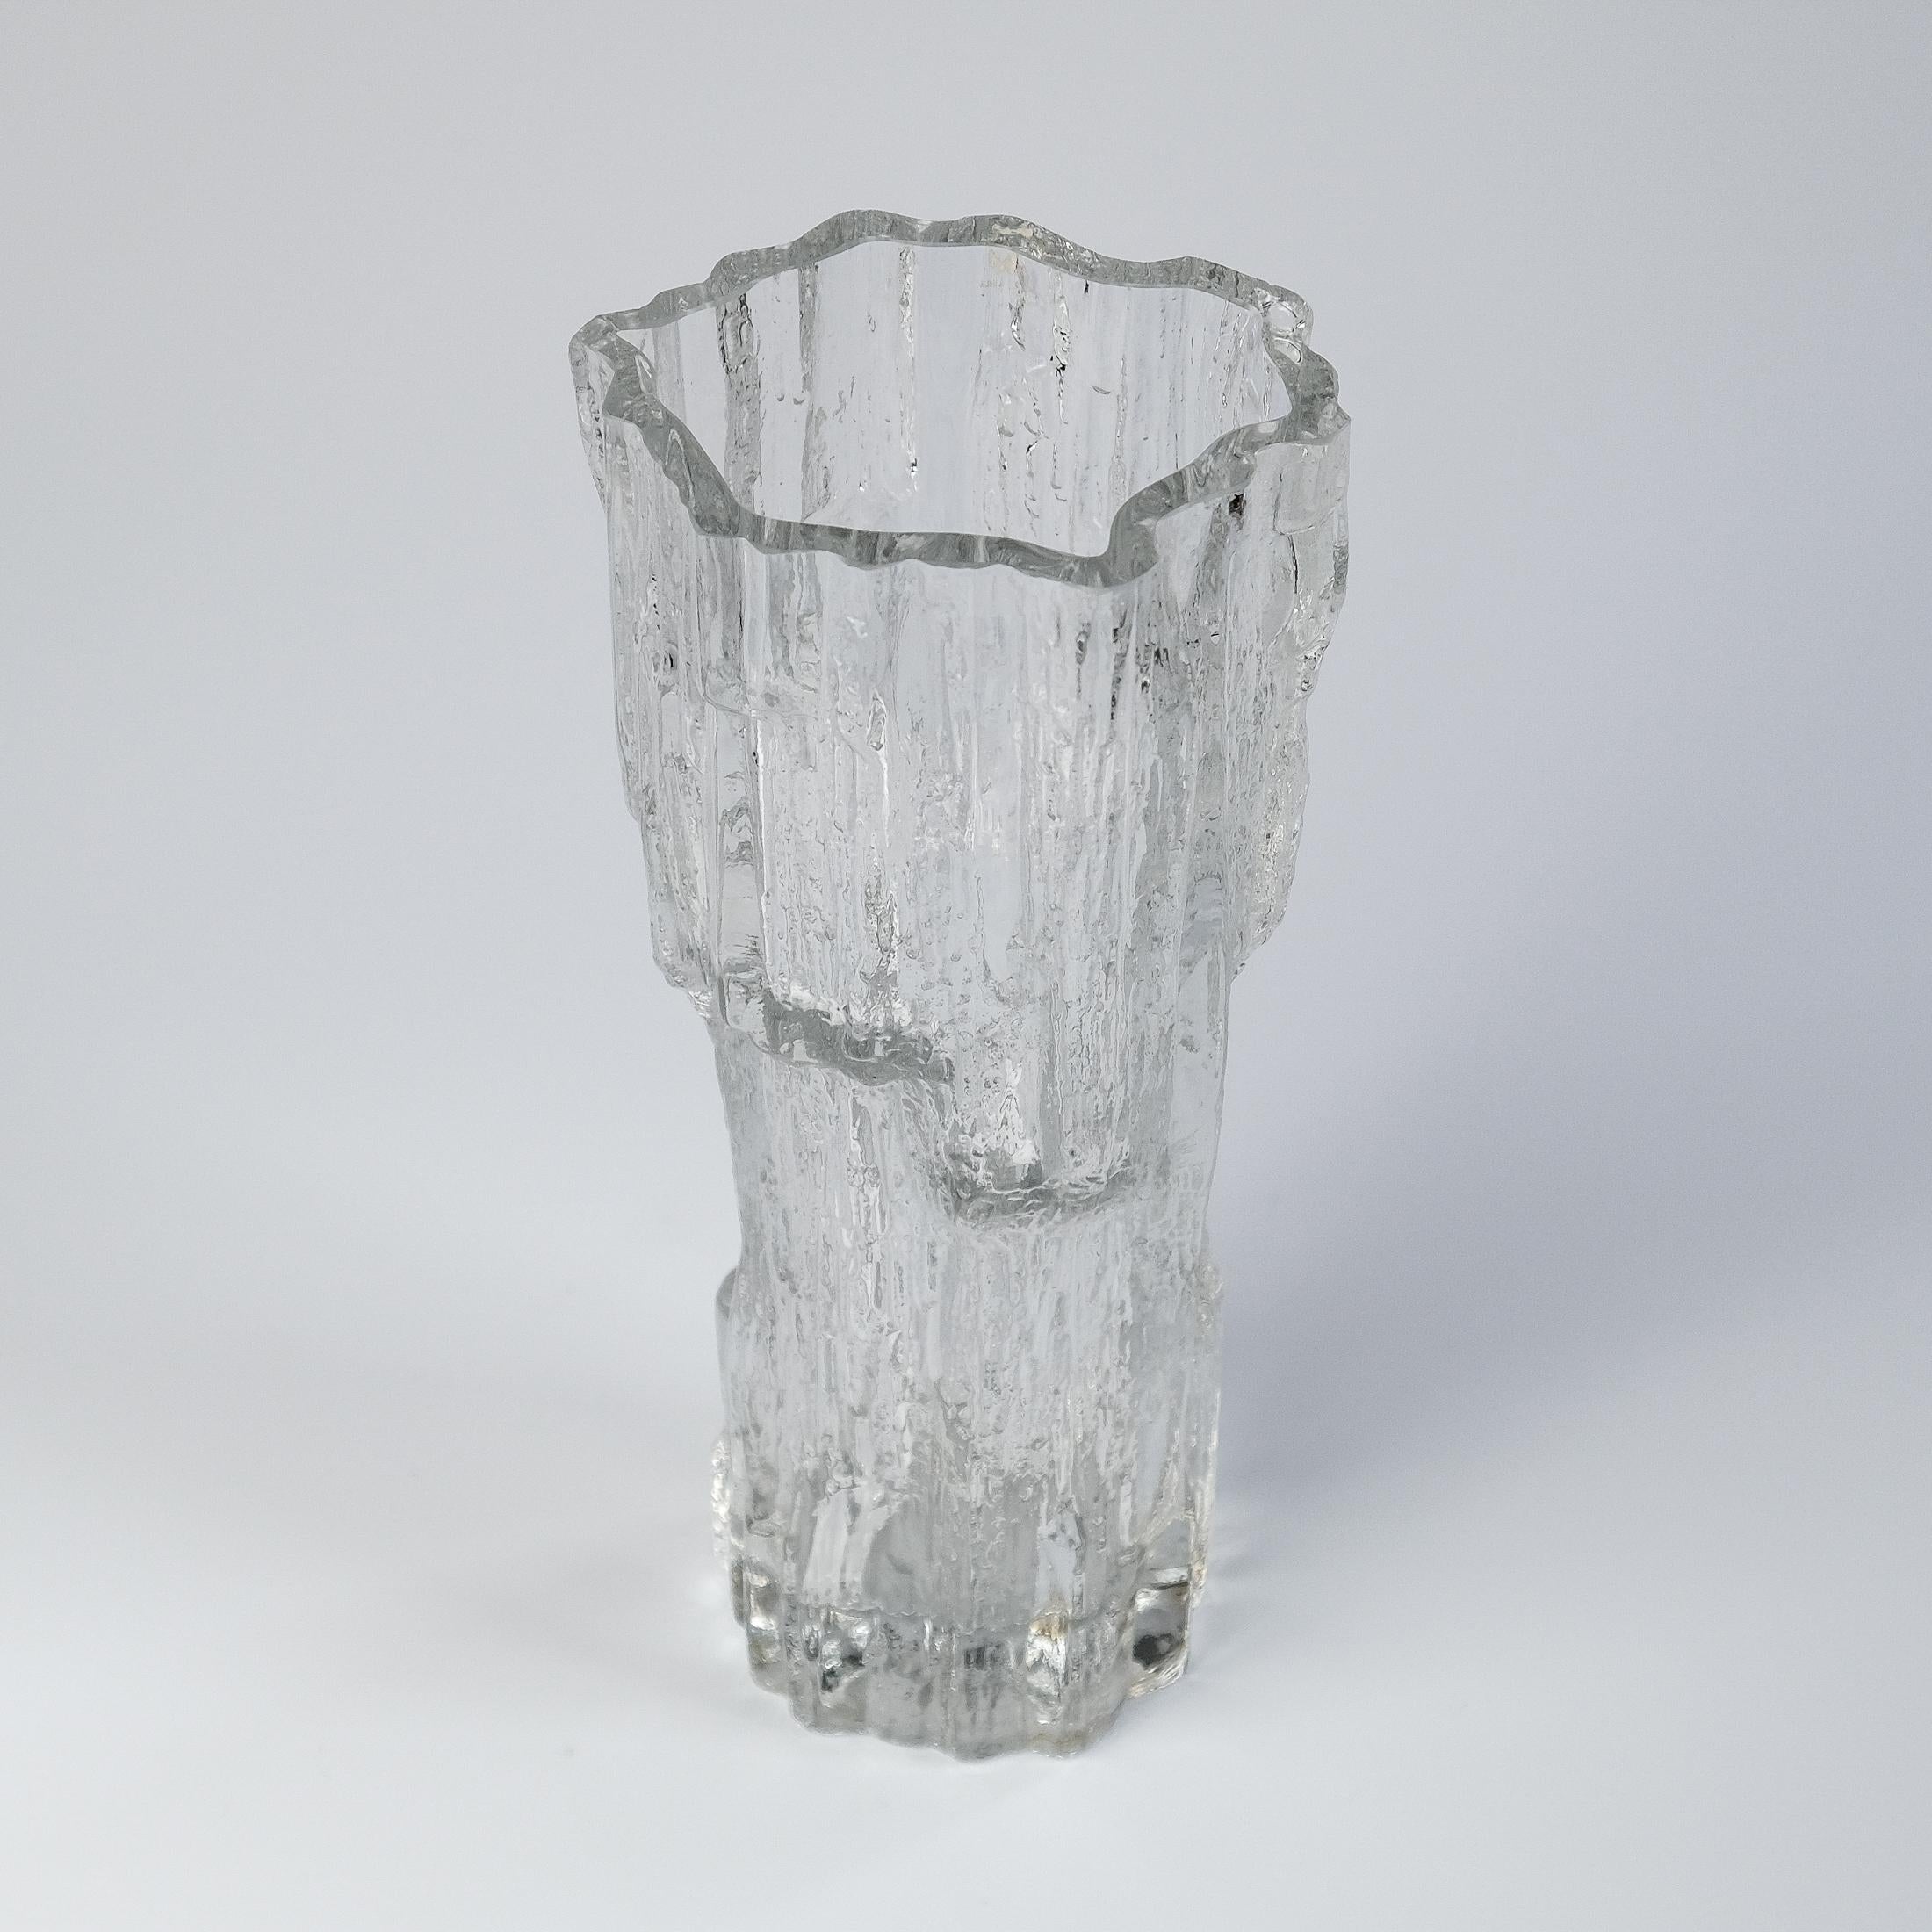 For sale is a Mid-Century Art Glass “Avena